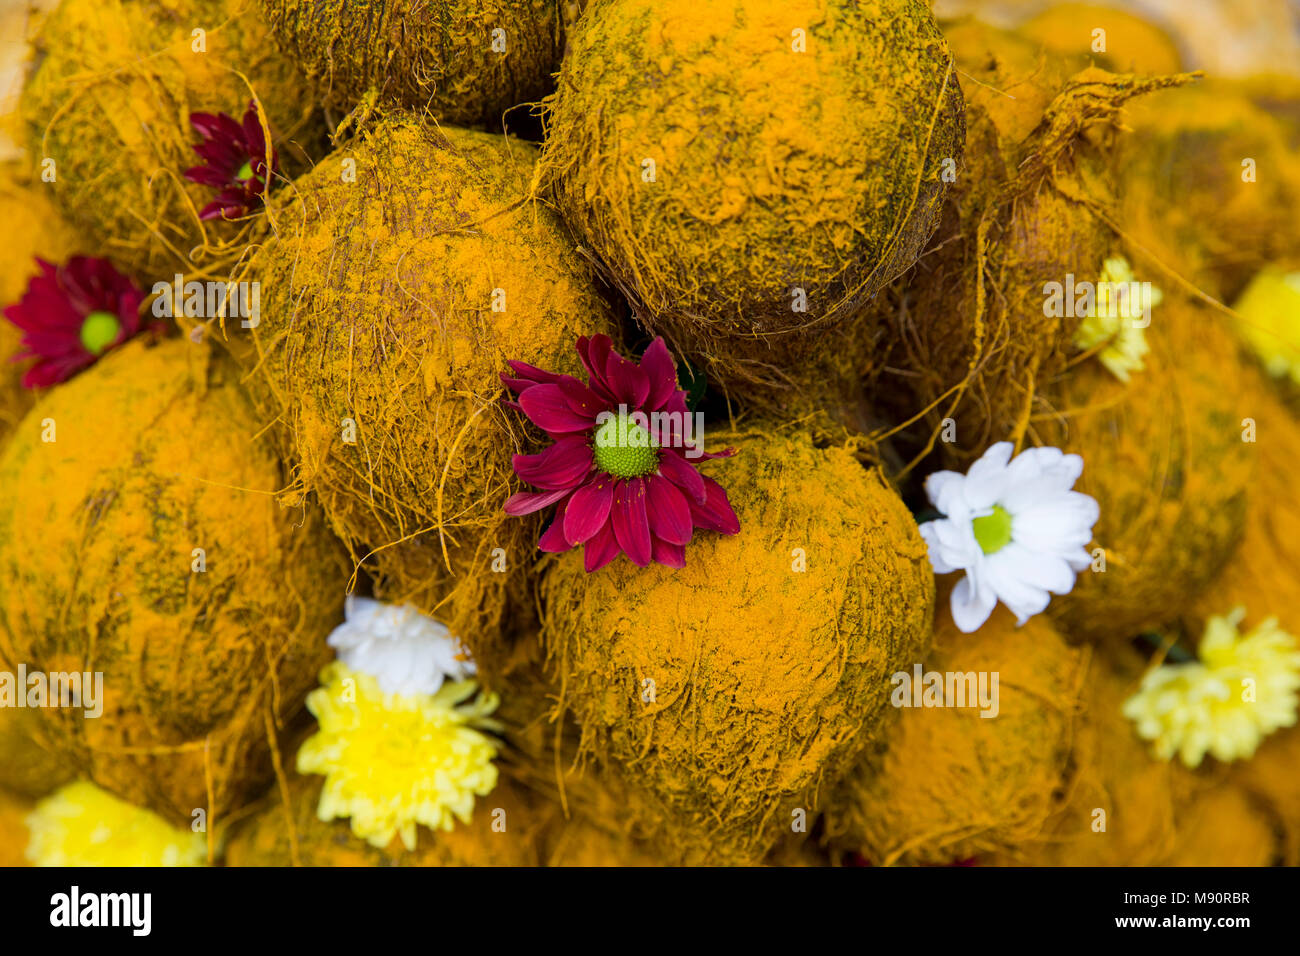 Ganesh festival in Paris. Coconuts that will be broken by devotees. France. Stock Photo